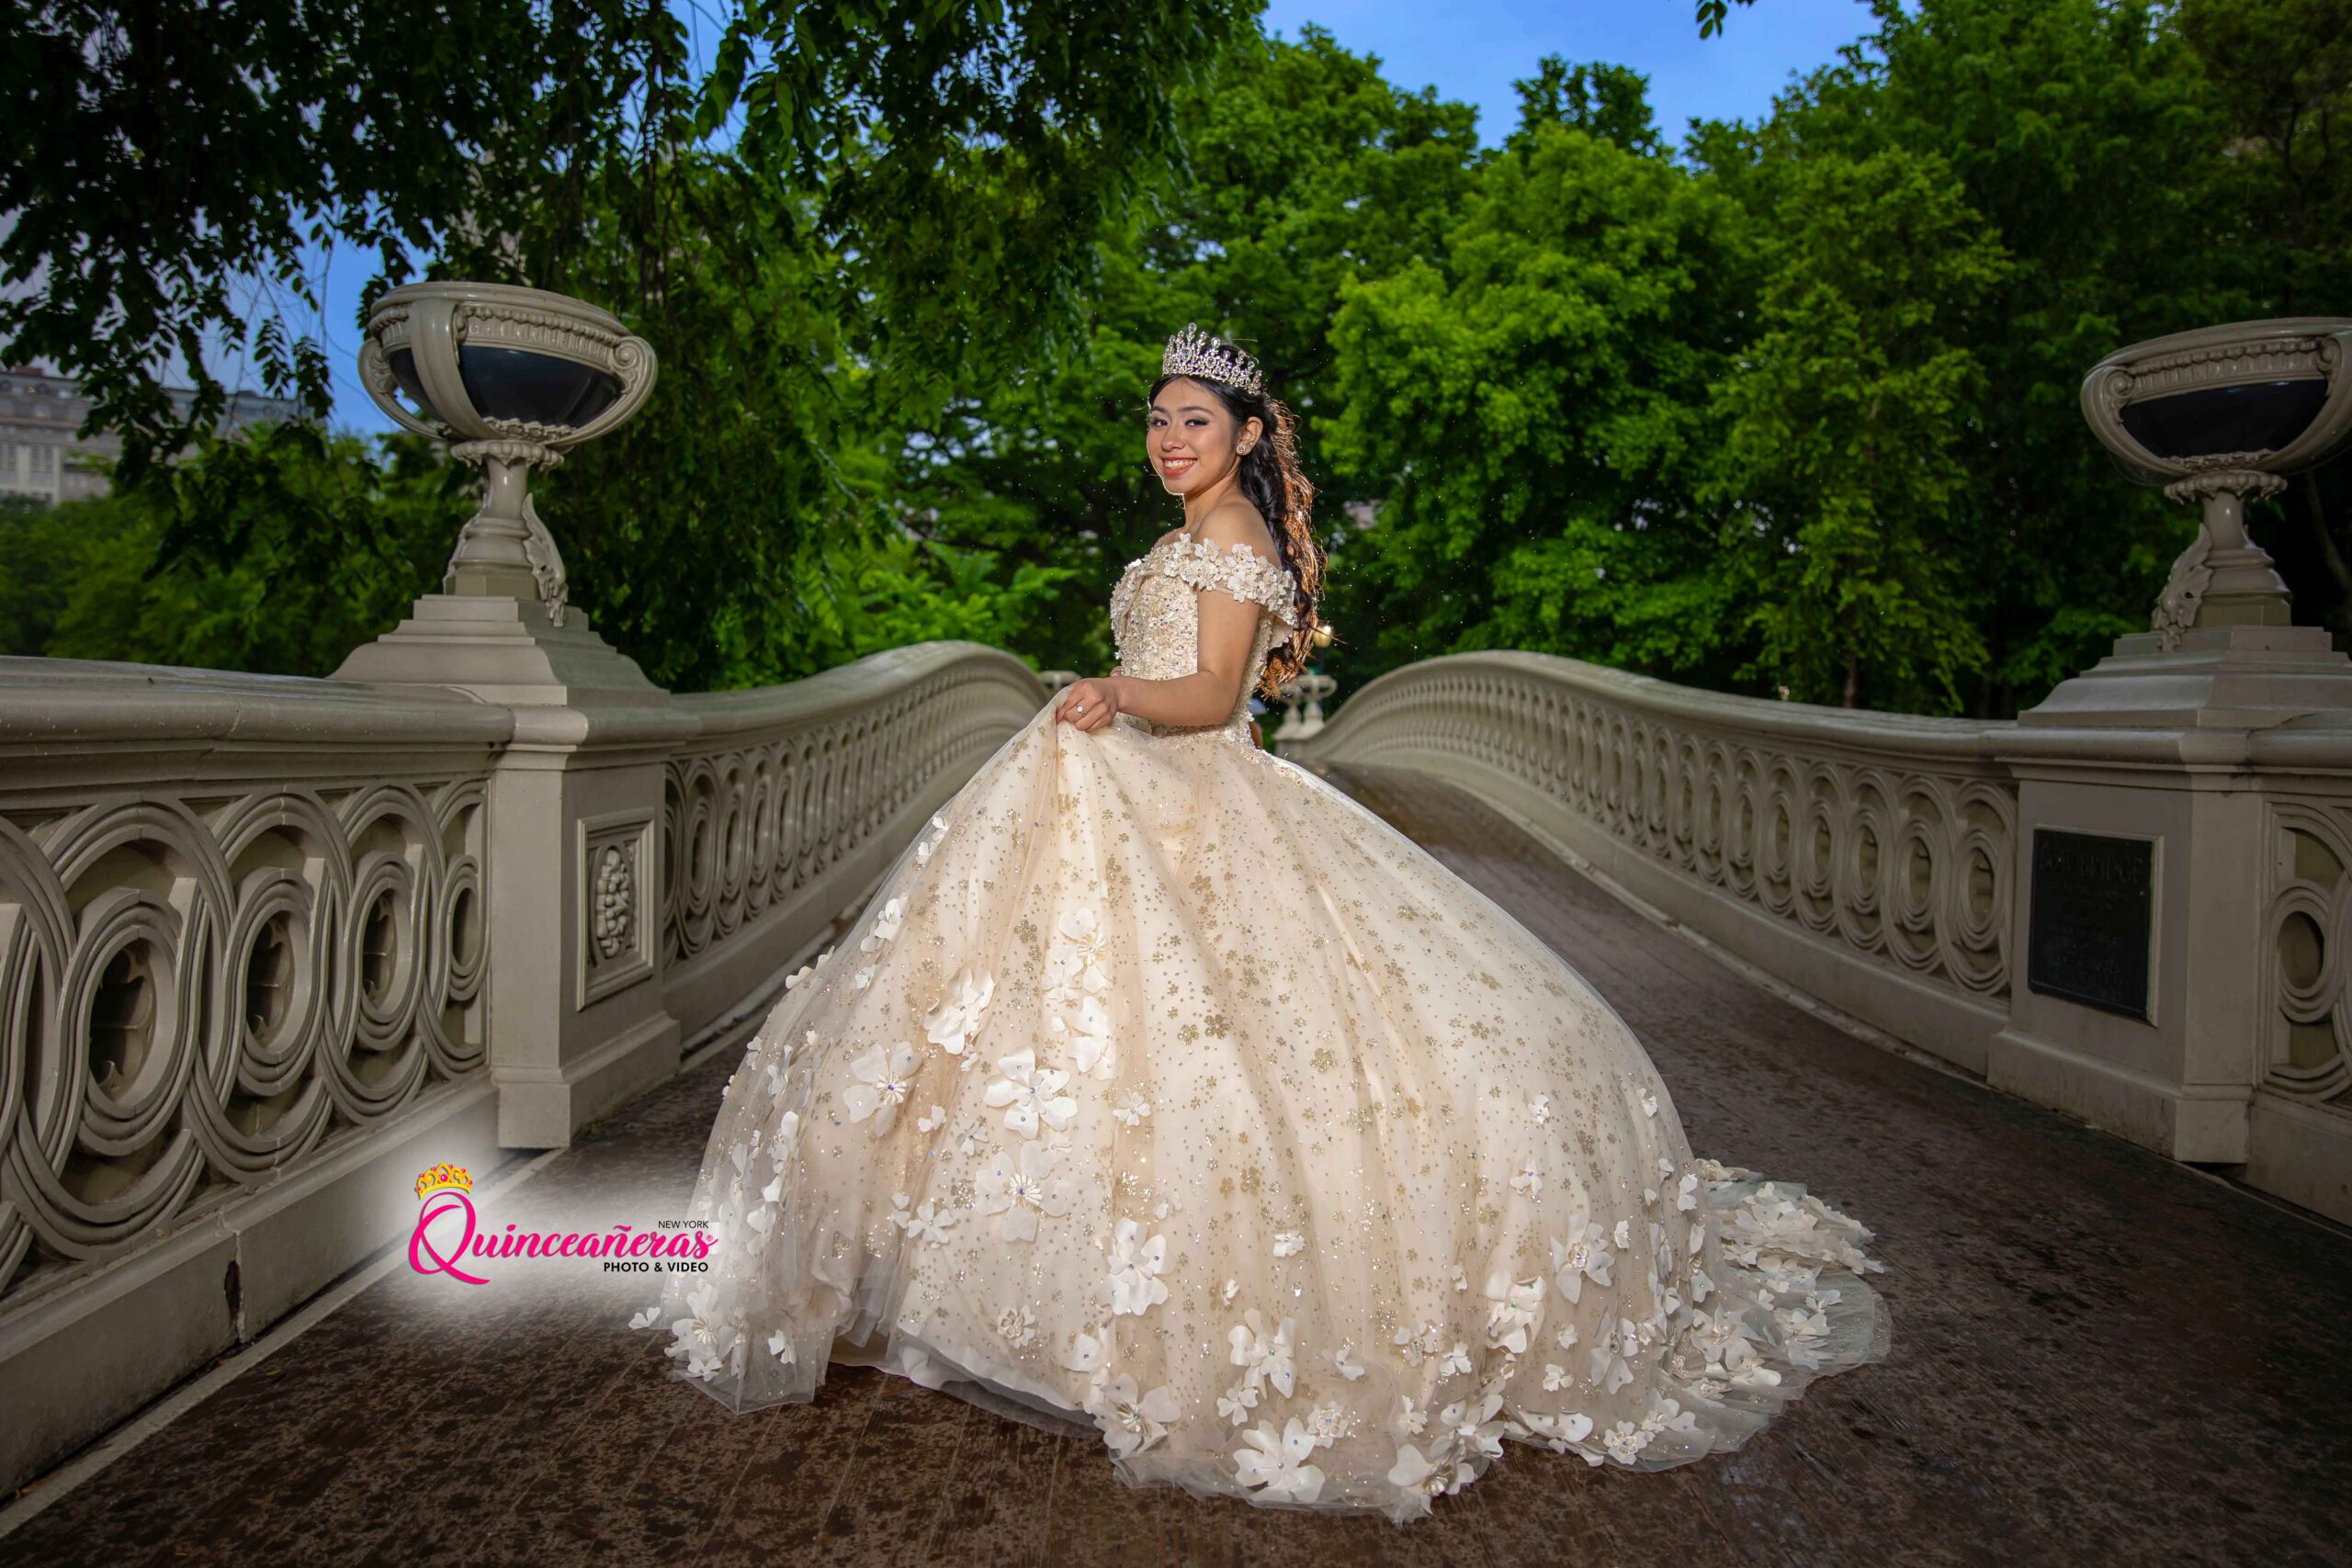 The wedding of Laycha Sweet 16 Photographer in New York - Central Park